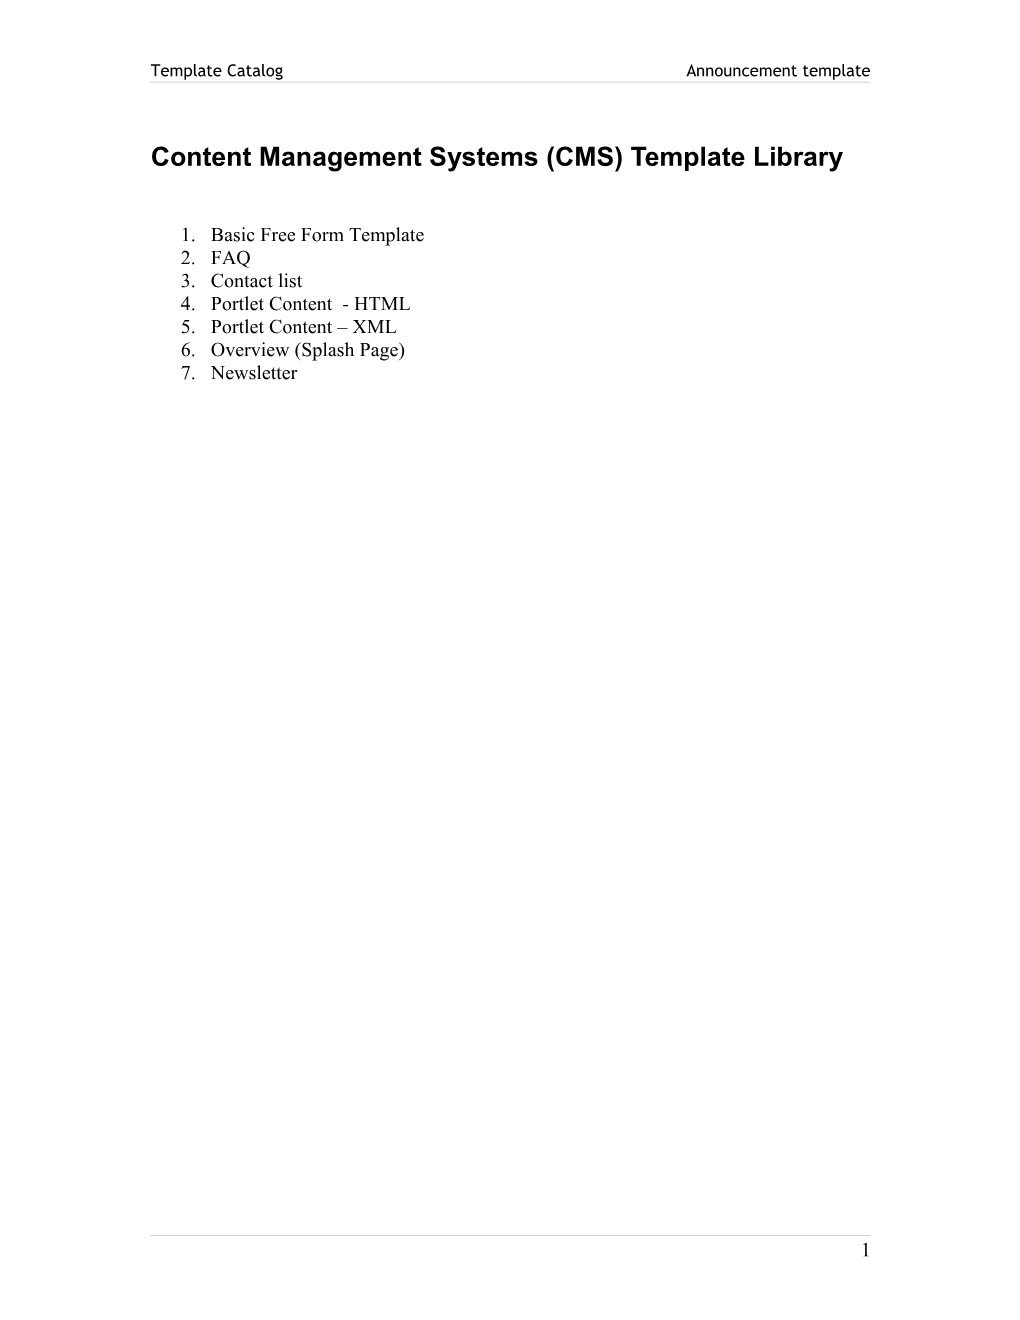 Content Management Systems (CMS) Template Library